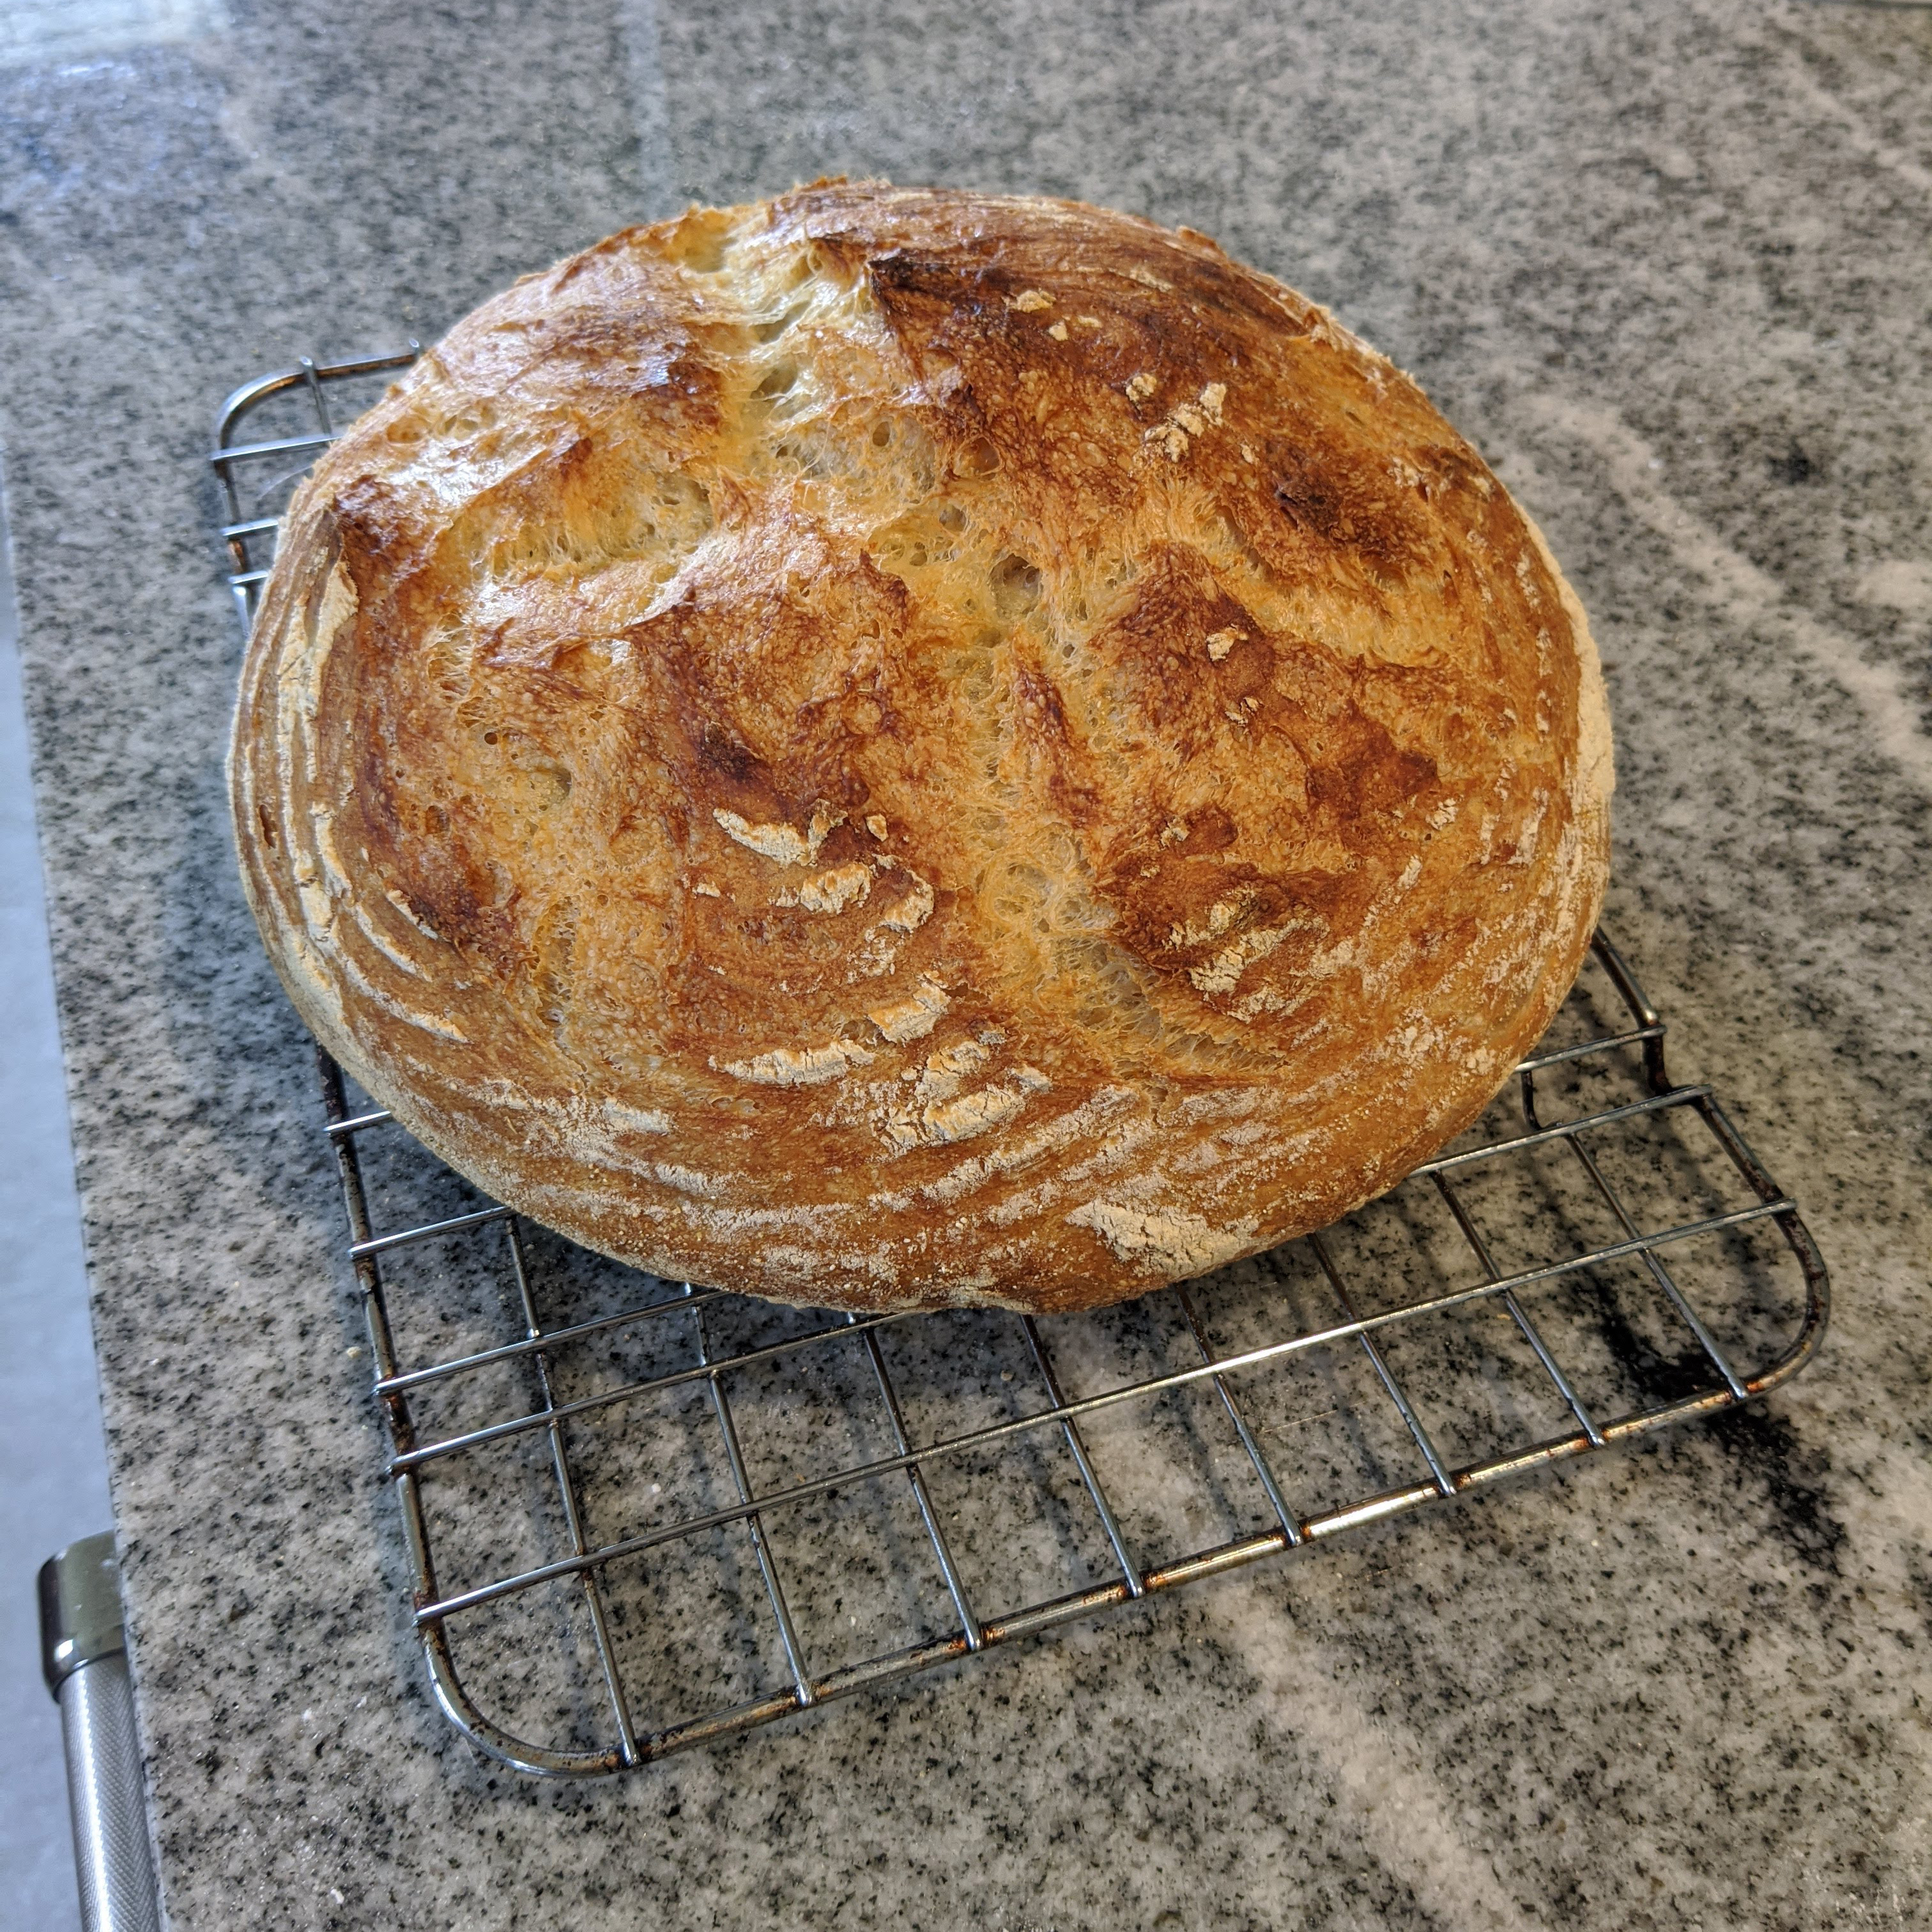 One of my earliest attempts at bread baking.